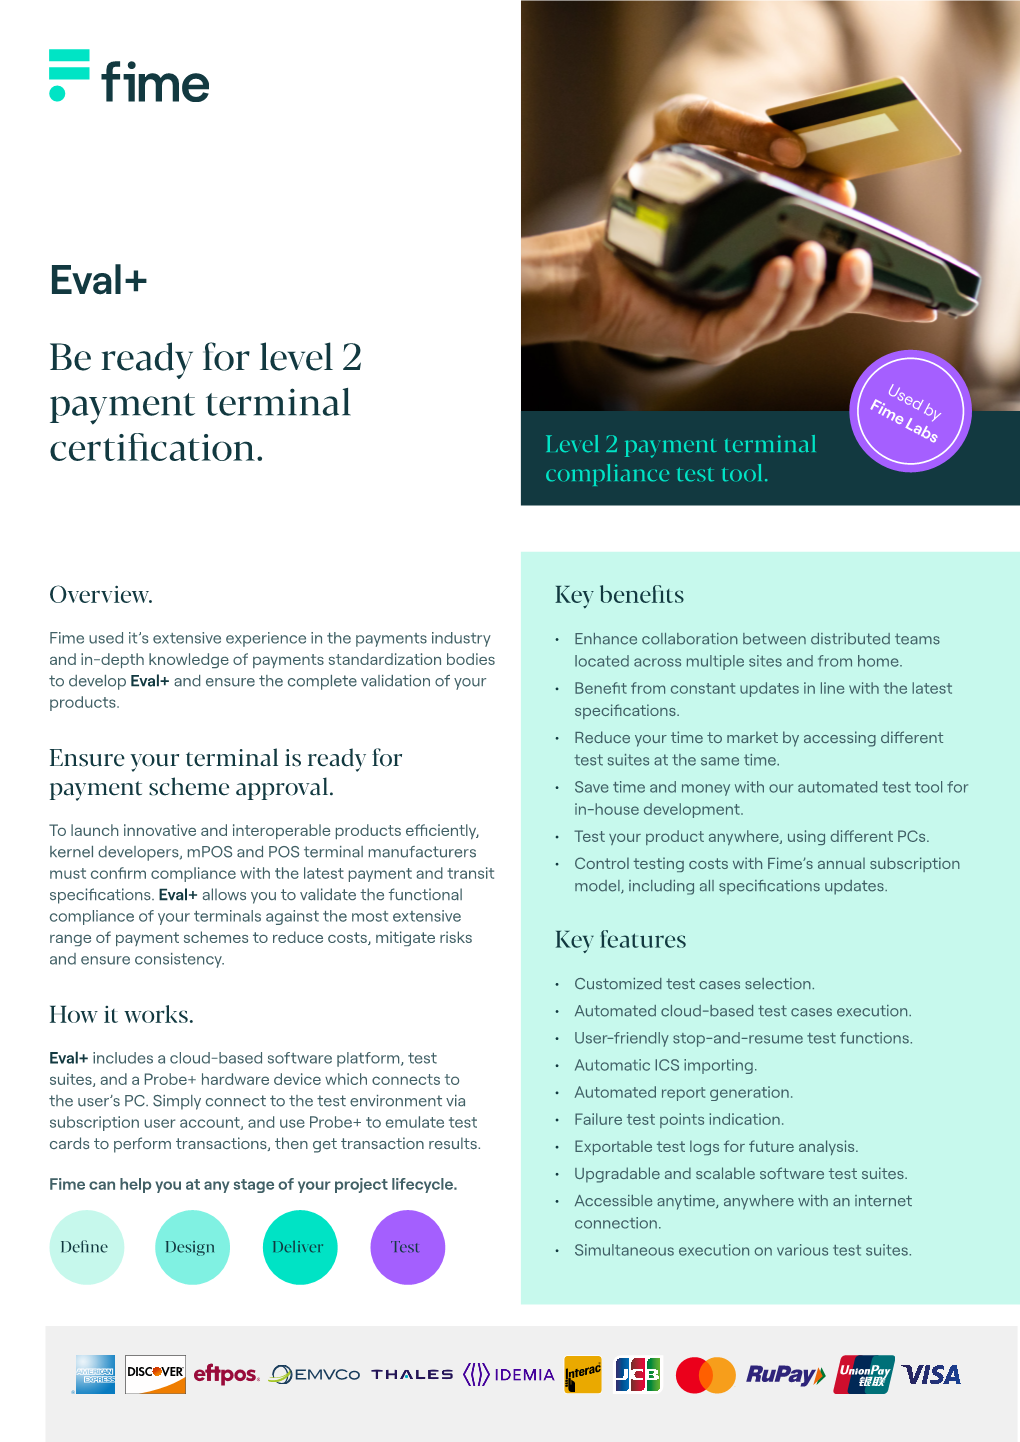 Be Ready for Level 2 Payment Terminal Certification